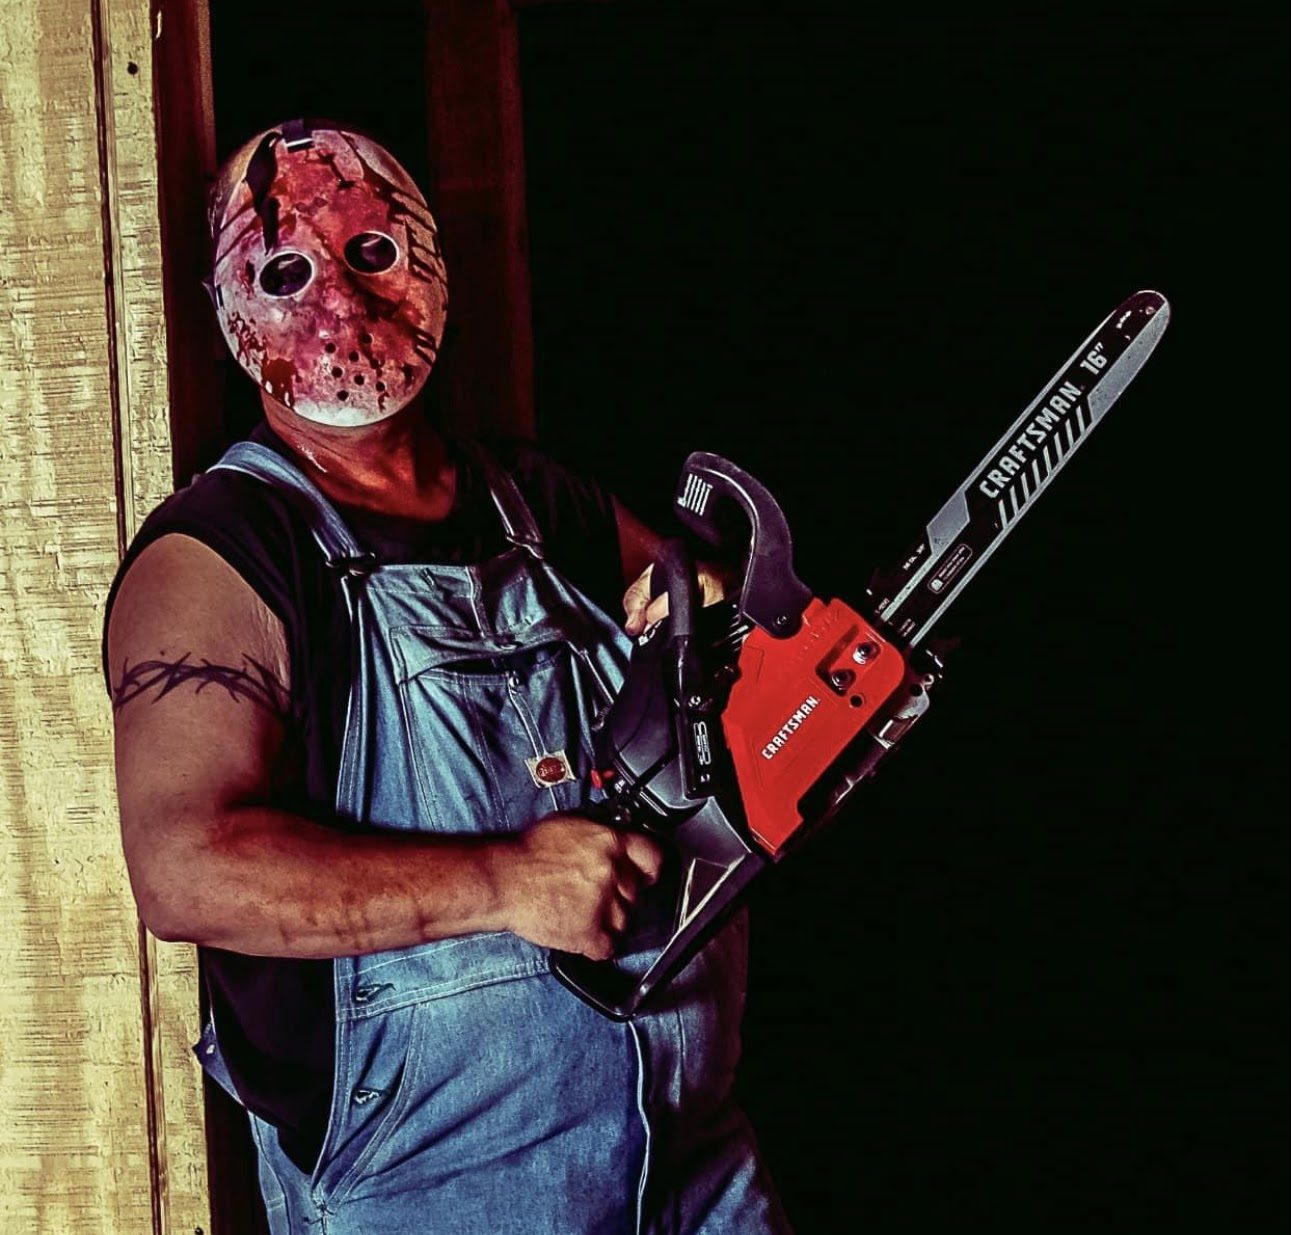 Photo of man in mask with chainsaw taken at Haunting at the Ridge. Haunting at the Ridge is Connecticut's scariest haunted attraction located at Powder Ridge Mountain in Middlefield, CT.